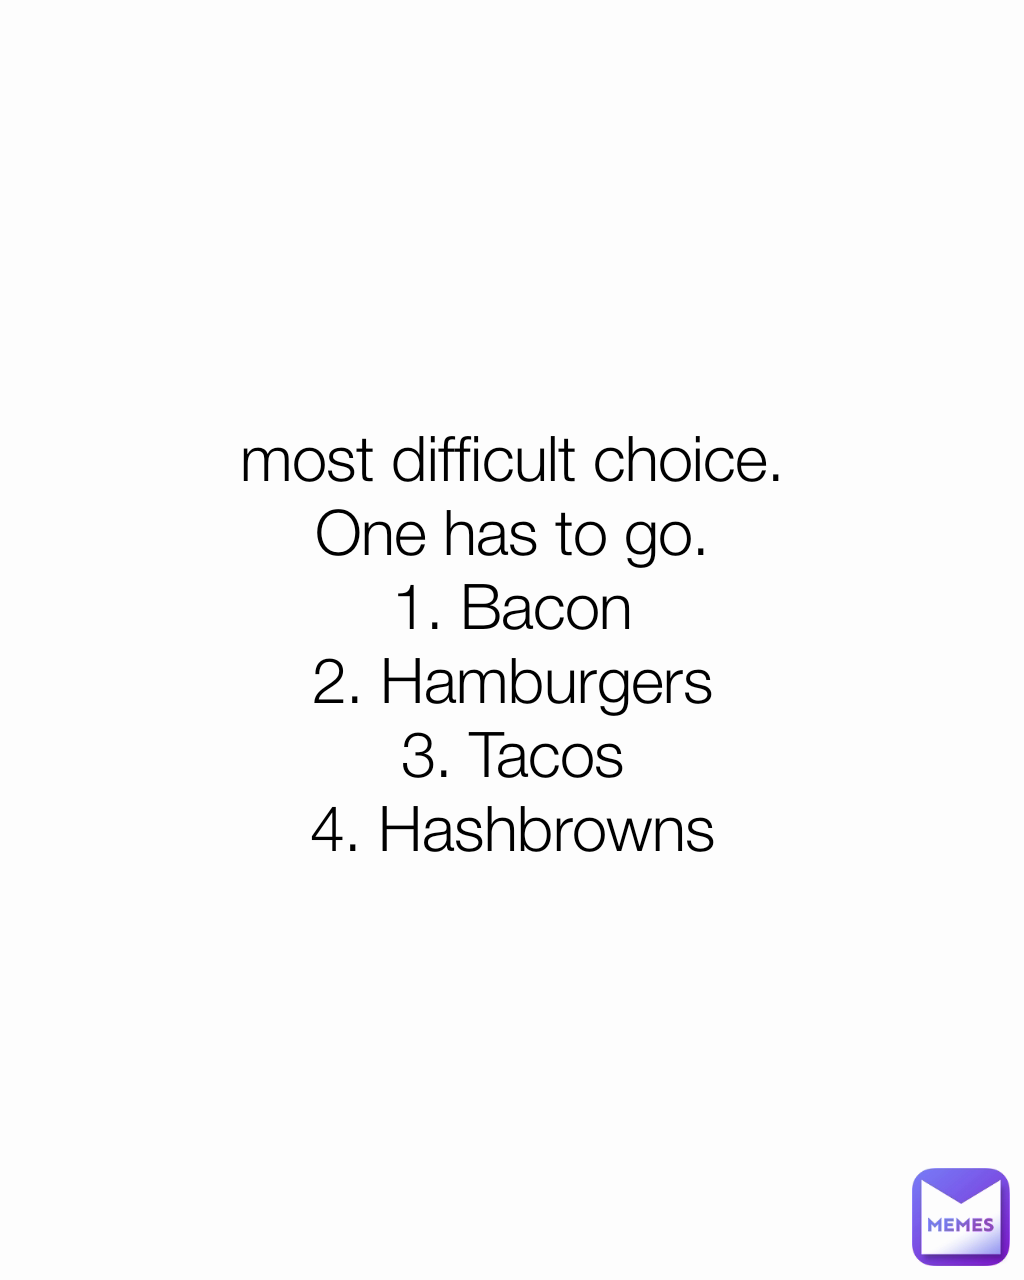 most difficult choice.
One has to go.
1. Bacon
2. Hamburgers
3. Tacos
4. Hashbrowns